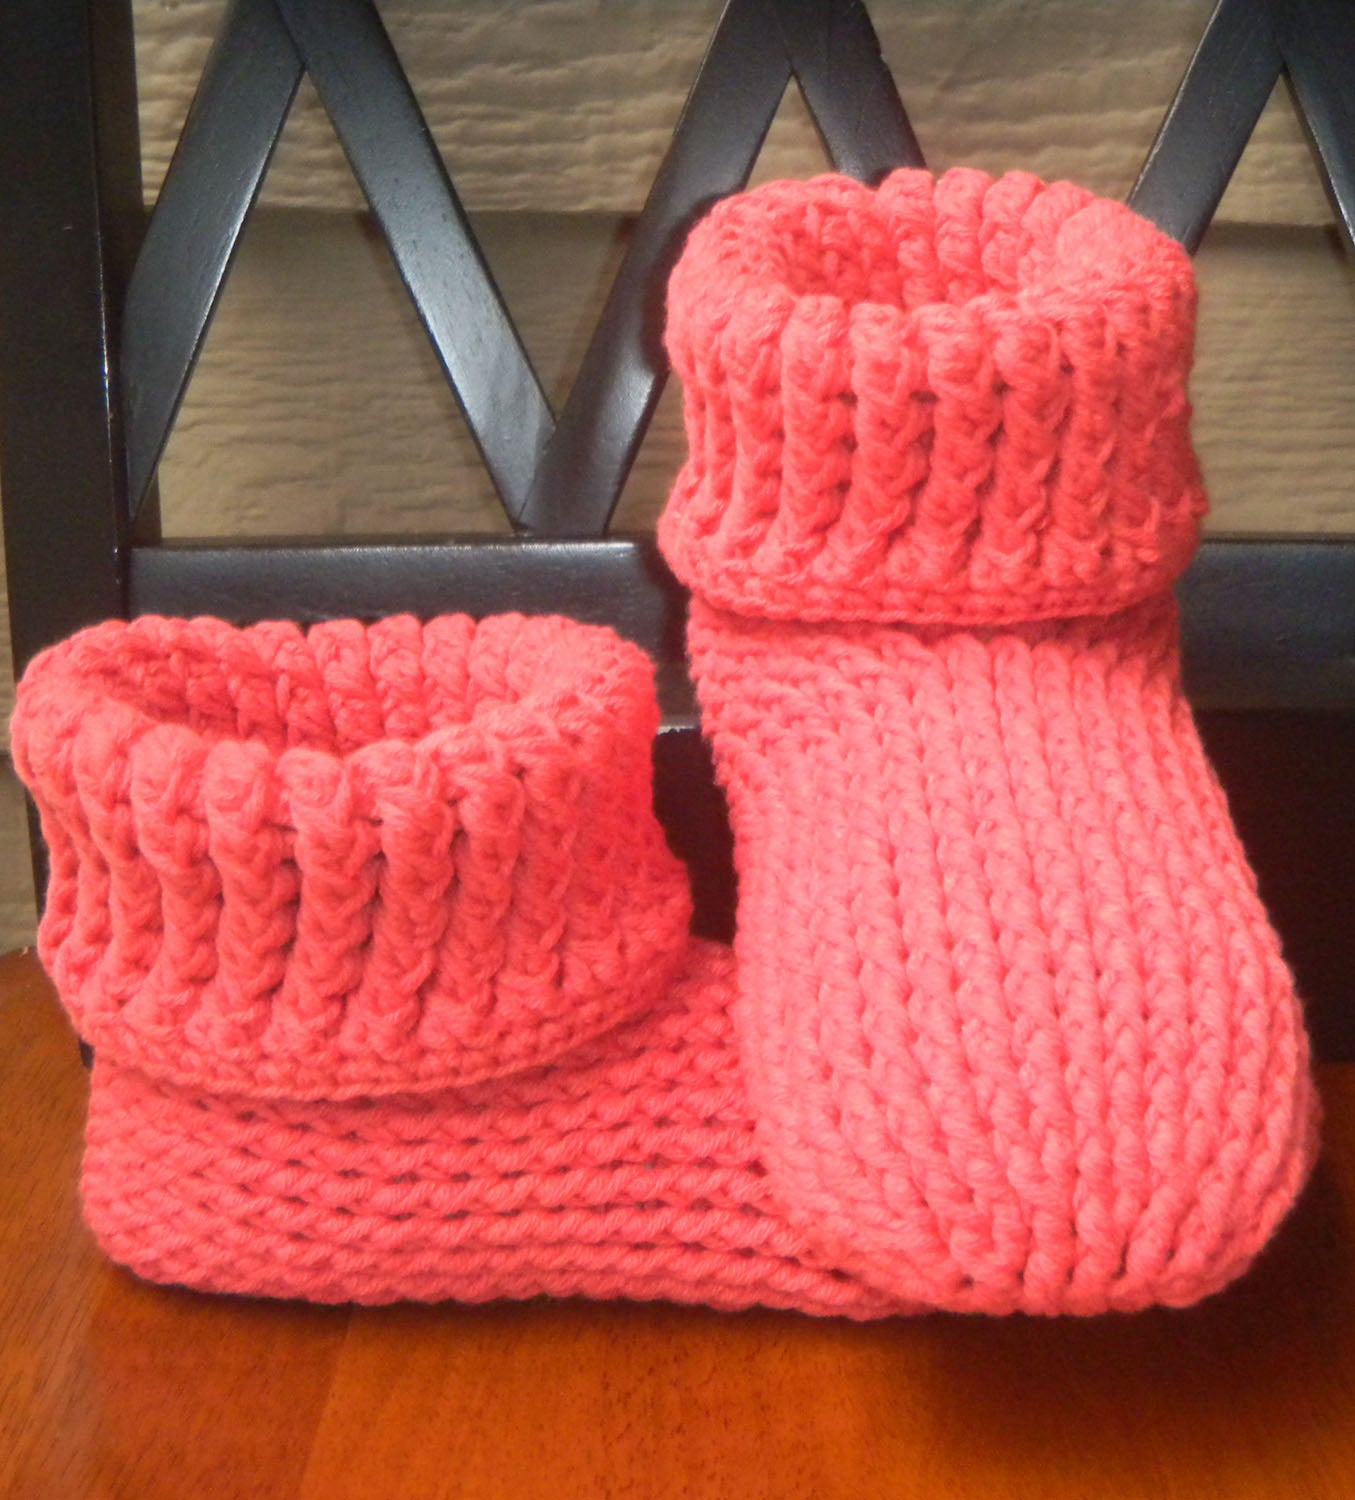 Knitting Patterns For Slipper Boots Crochet Pattern Knit Look Slipper Boots Adult Sizes 3 12 Instant Download Pdf